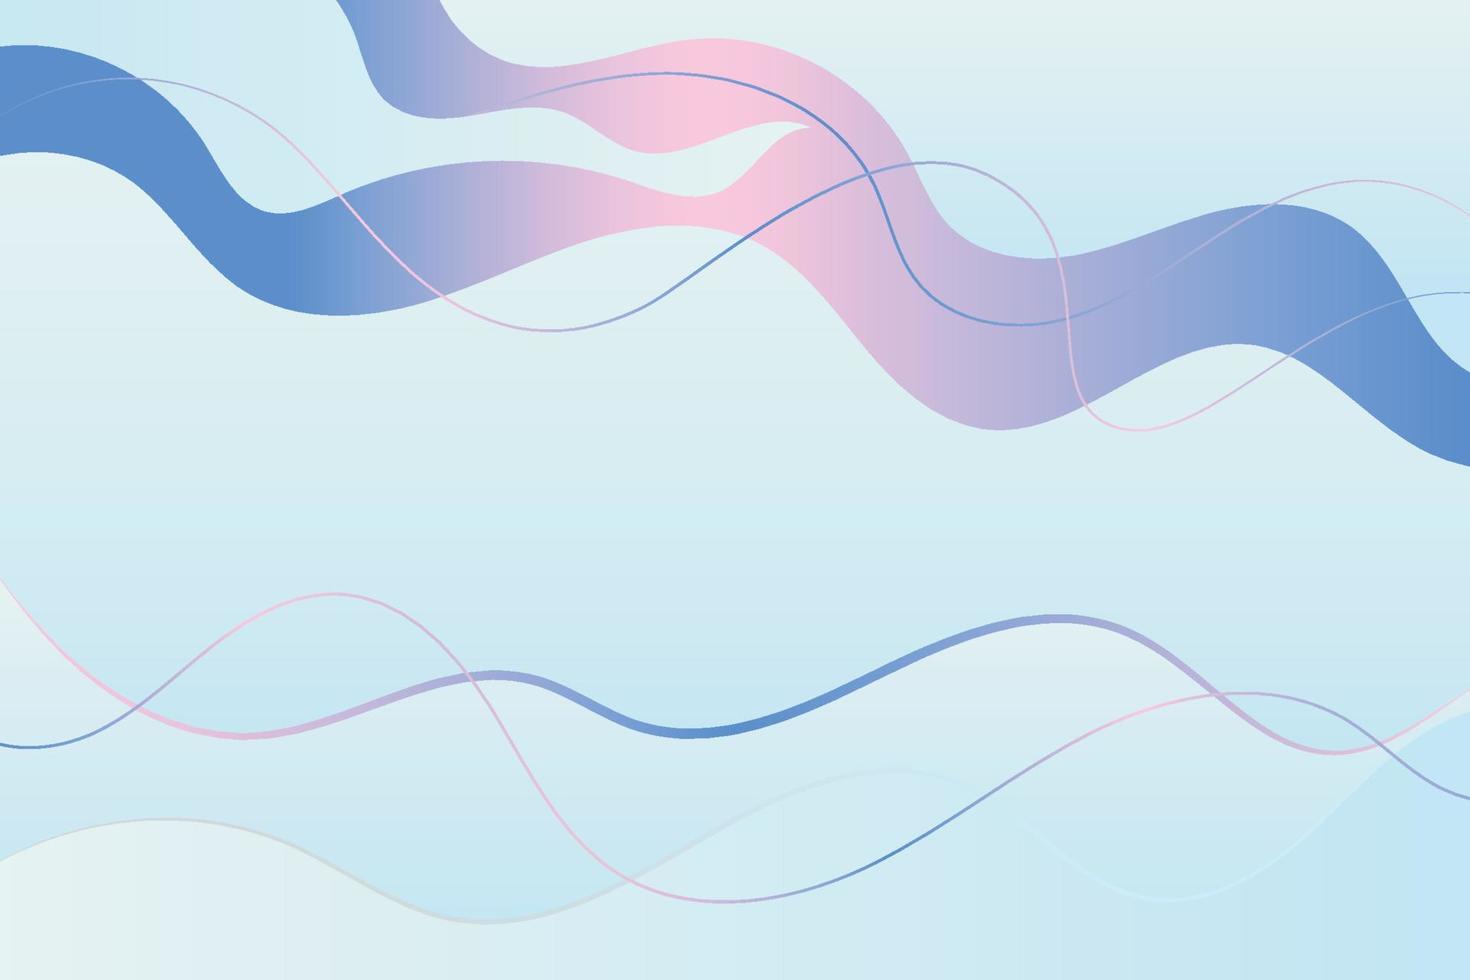 Abstract vector background, elegant wavy lines for brochure, poster, flyer, invitation, and presentation. Navy blue gradient wave illustration